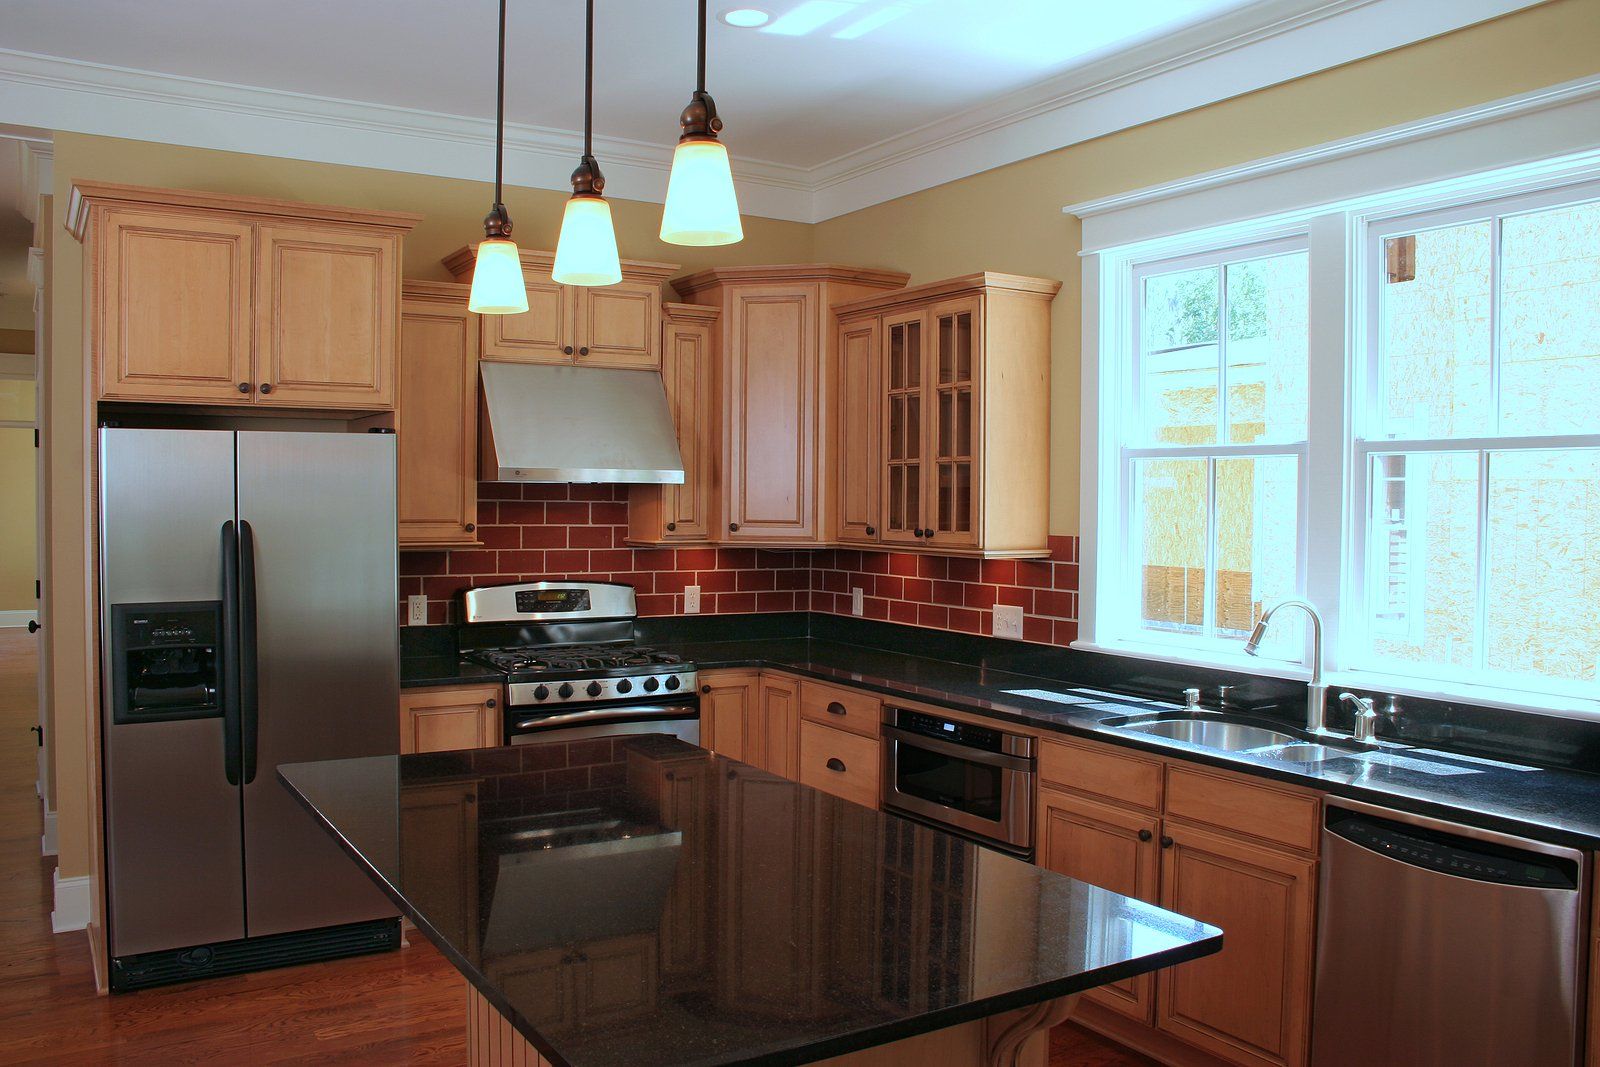 Horry County Kitchen Remodeling Services Near You